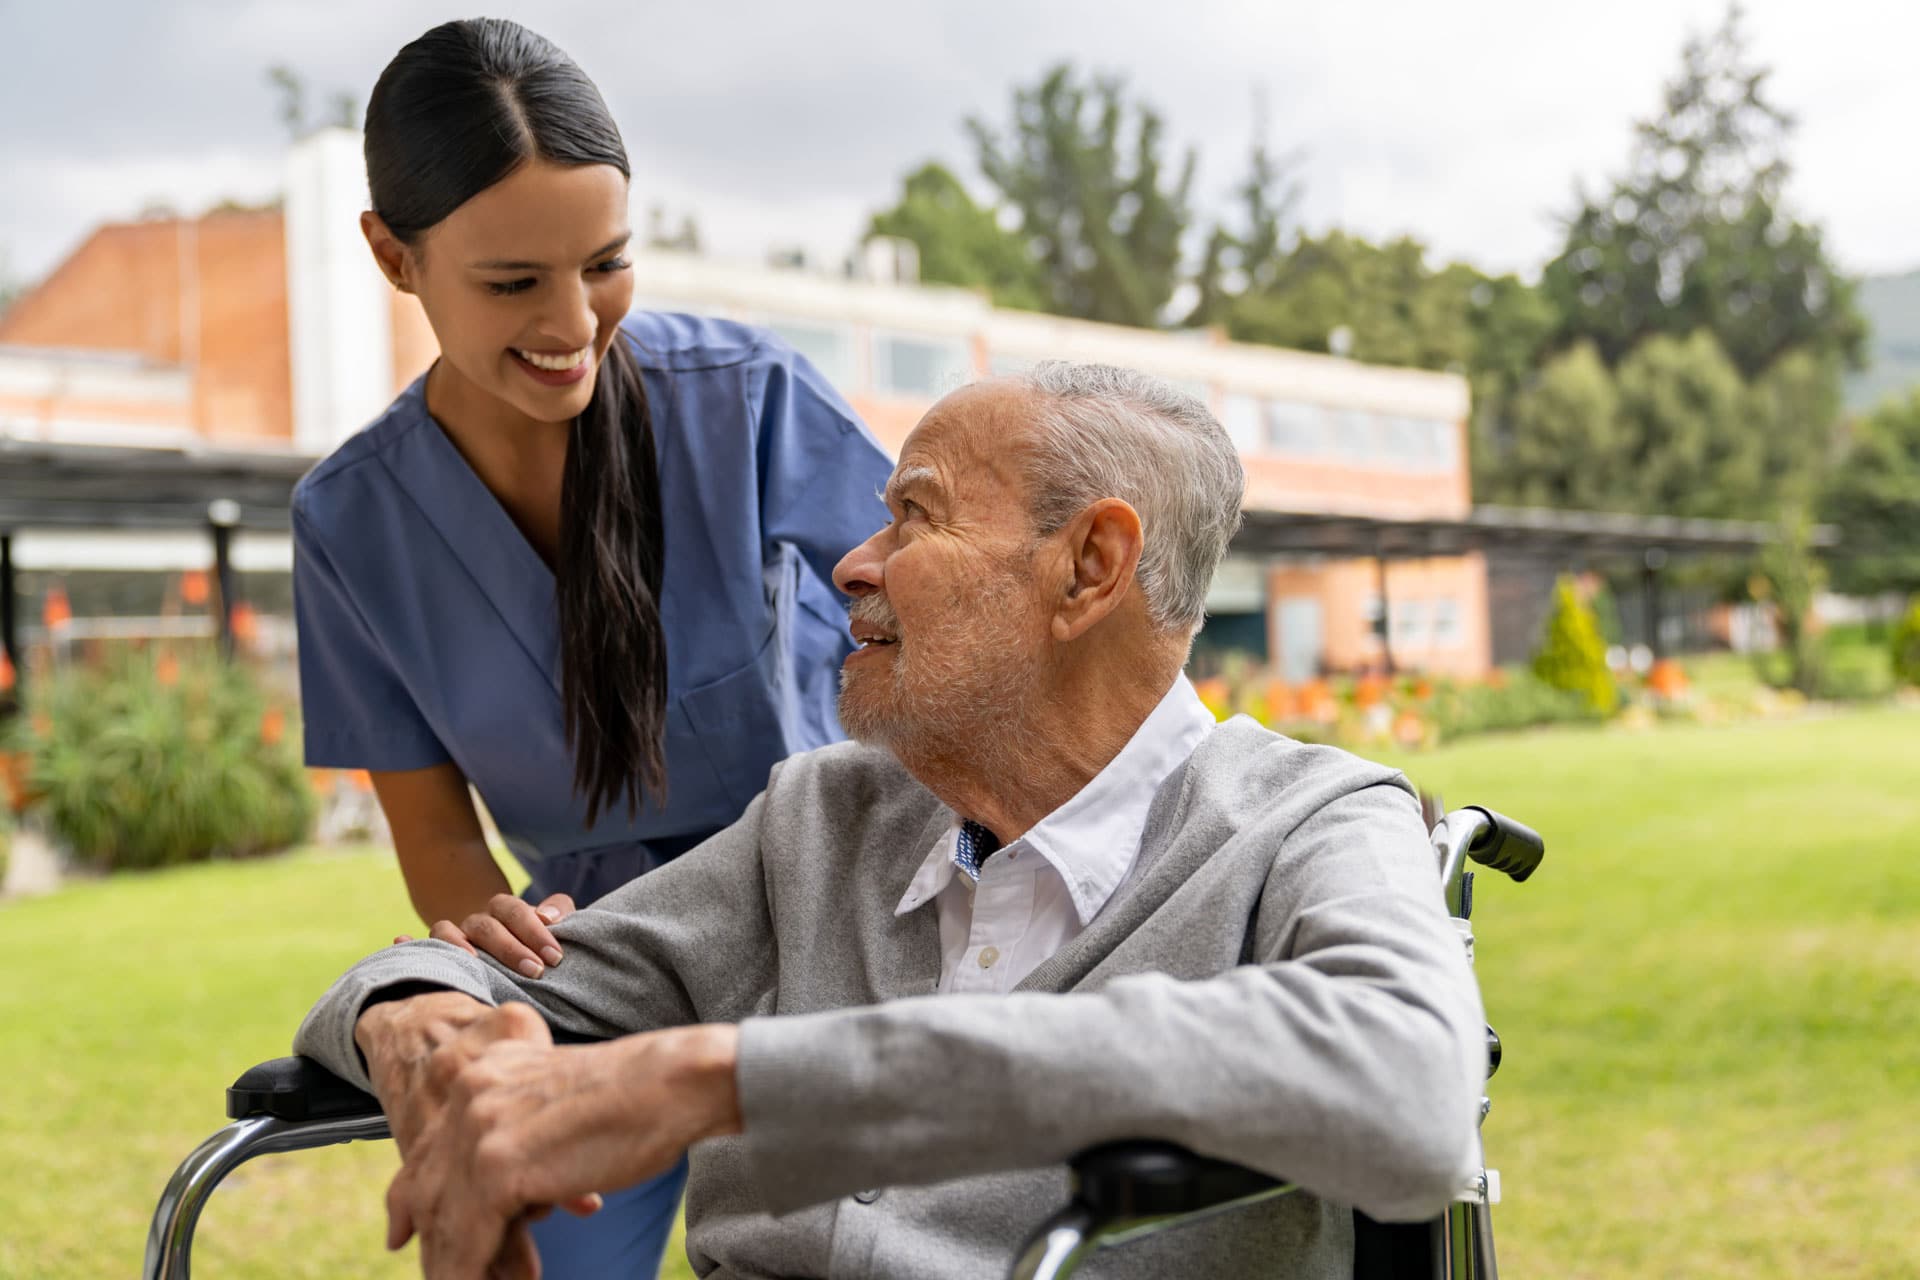 certified nurses assistant talking with wheelchair patient outdoors